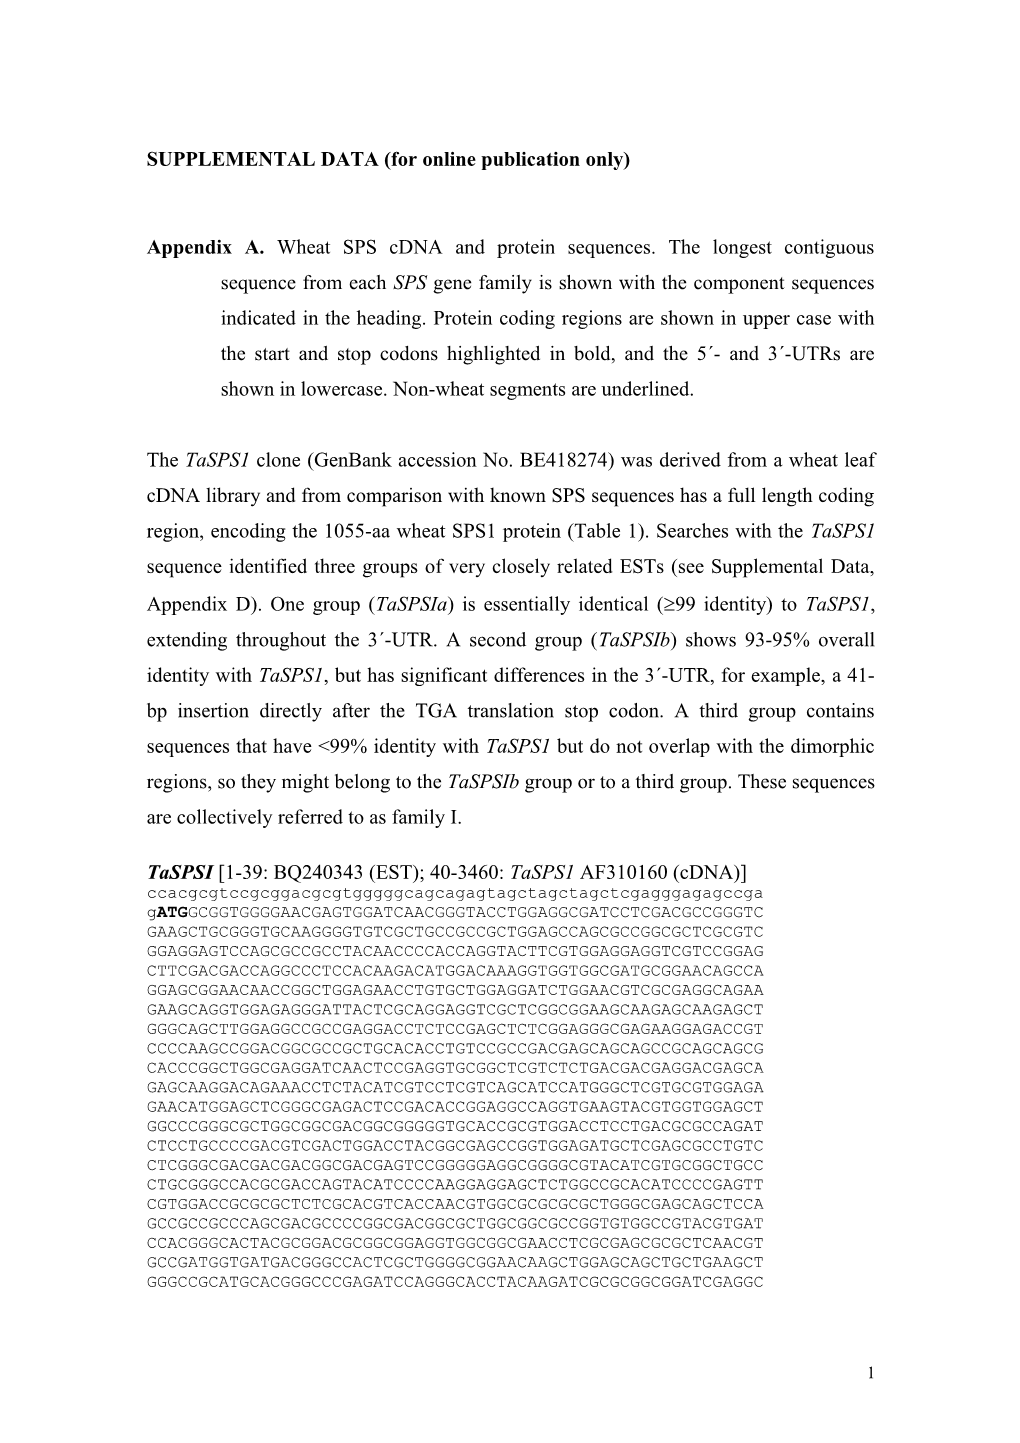 Identification and Expression Analysis of Five Classes of Sucrose-Phosphate Synthase Genes